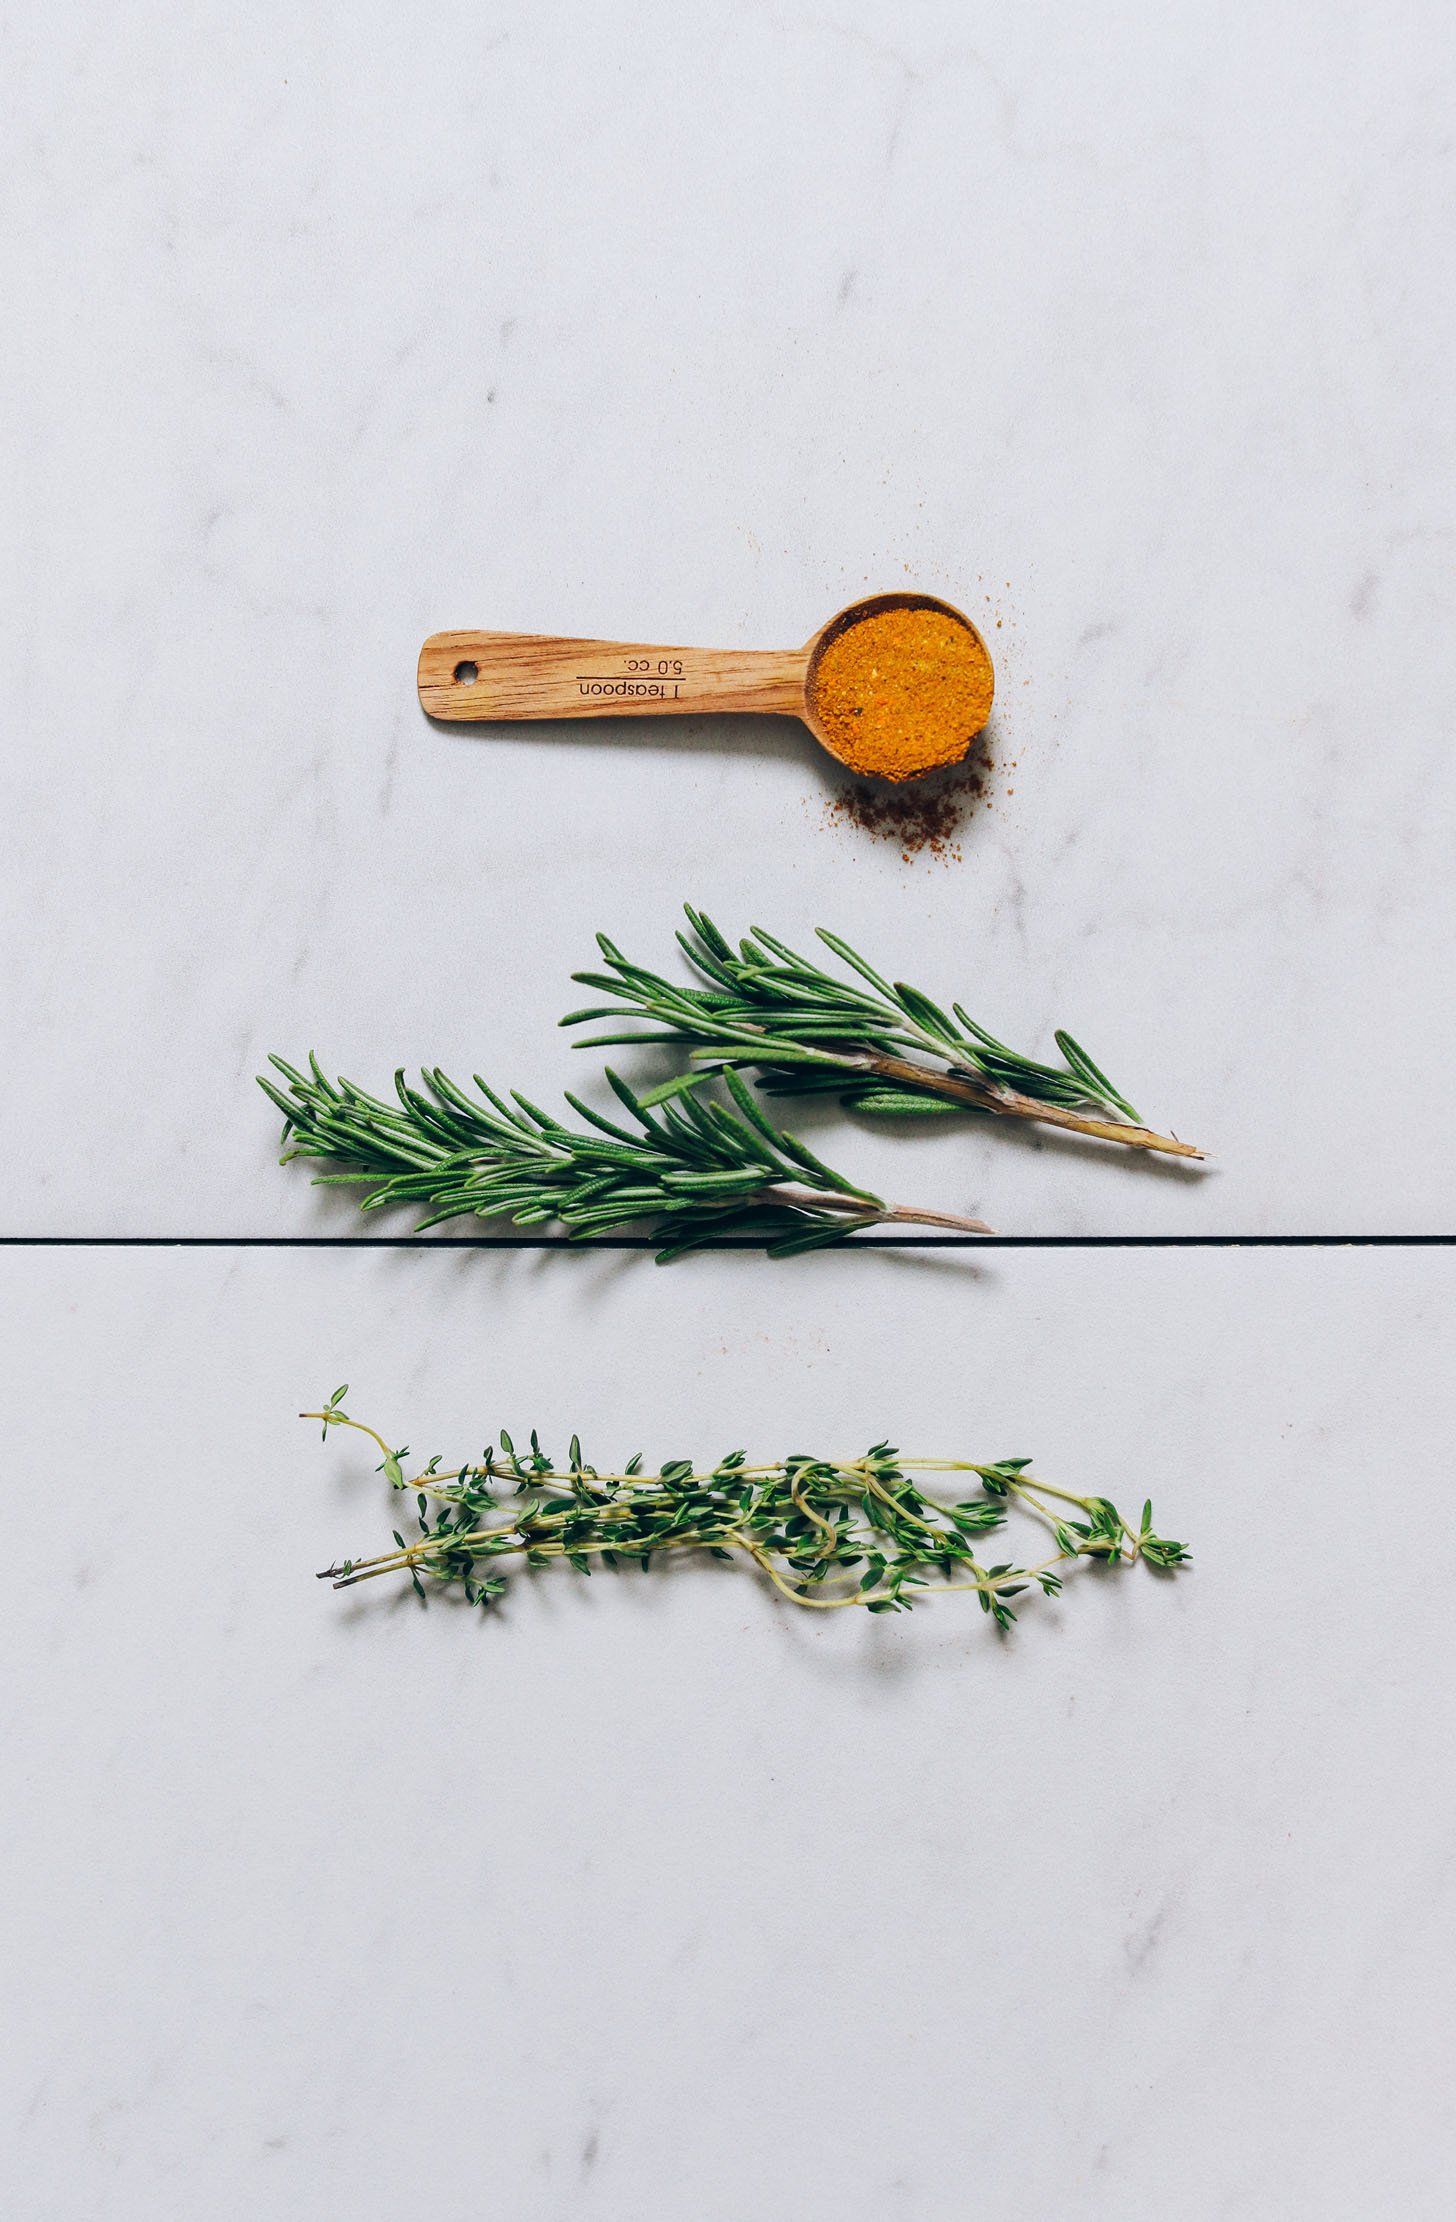 Curry powder, rosemary, and thyme